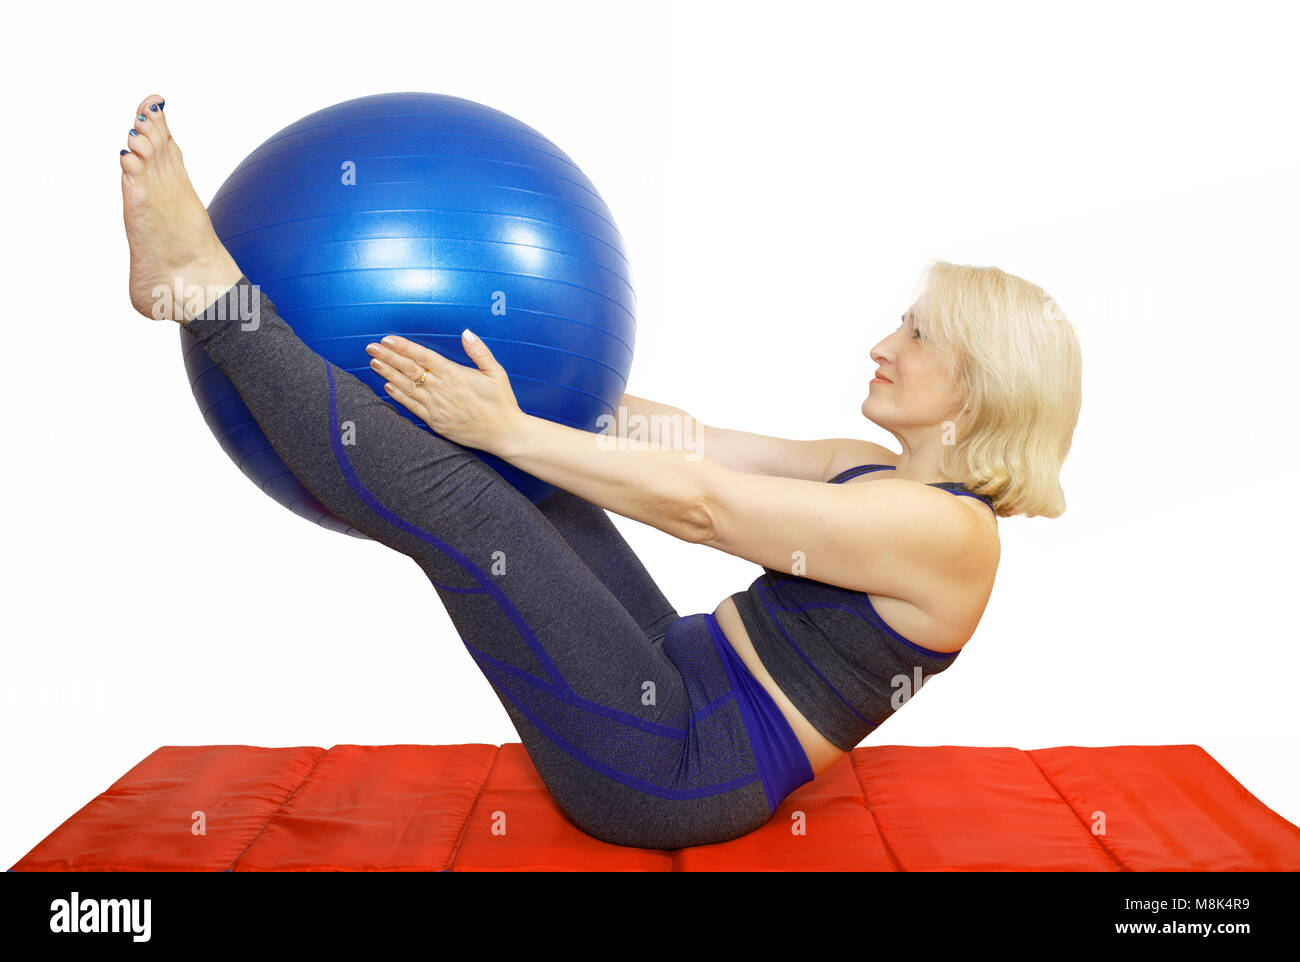 A middle-aged woman performs a physical exercise from Pilates,compresses kicking the ball the fitball and raises them . Exercise for elasticity and bo Stock Photo